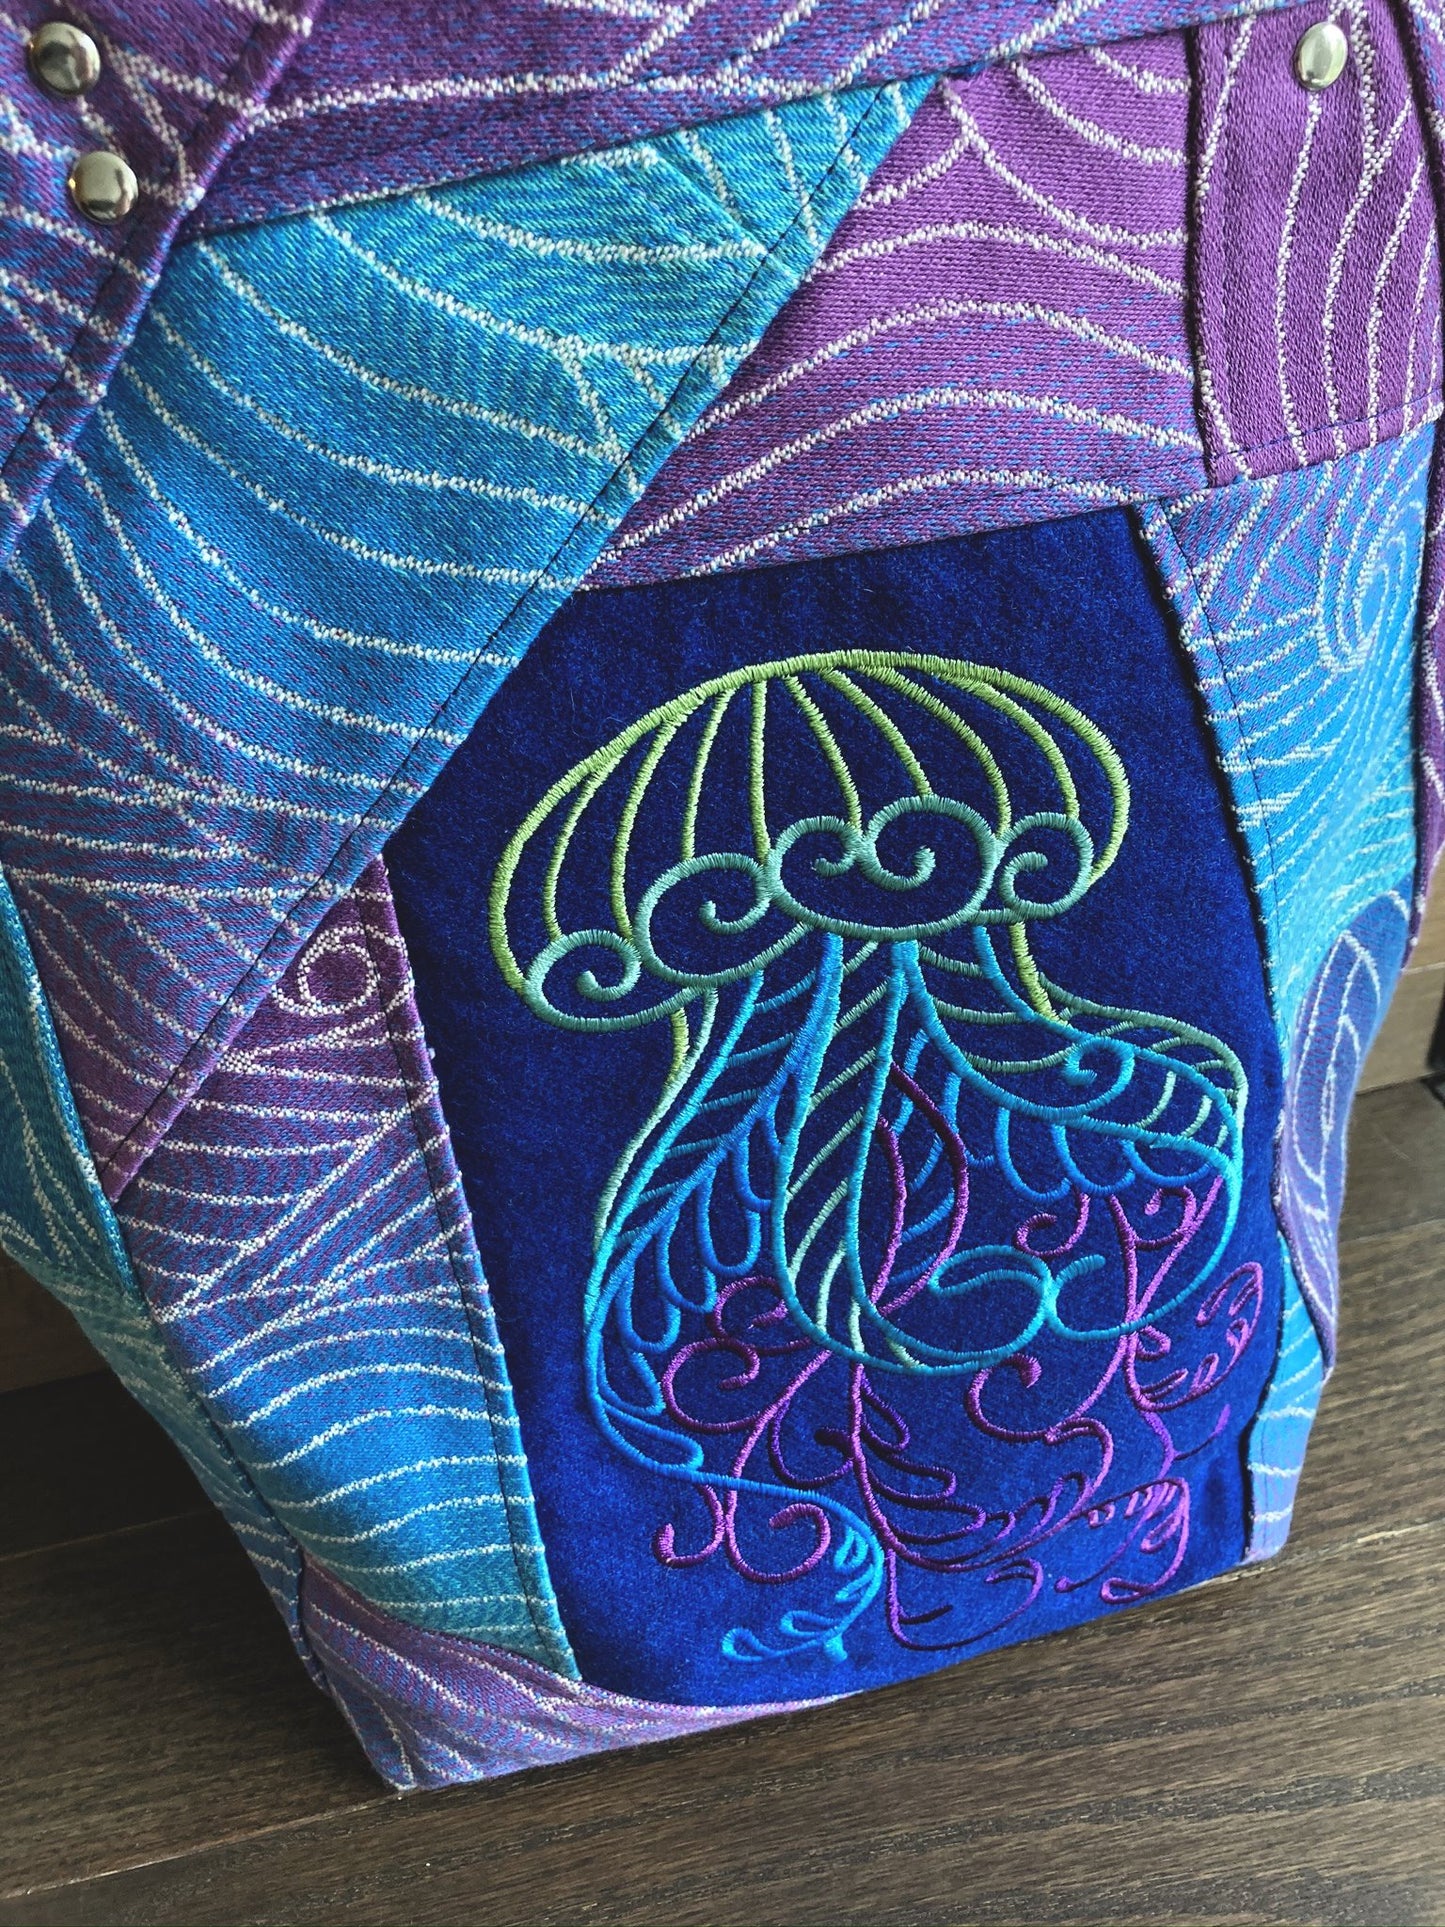 Jellyfish and Pieced Jacquard Tote Bag